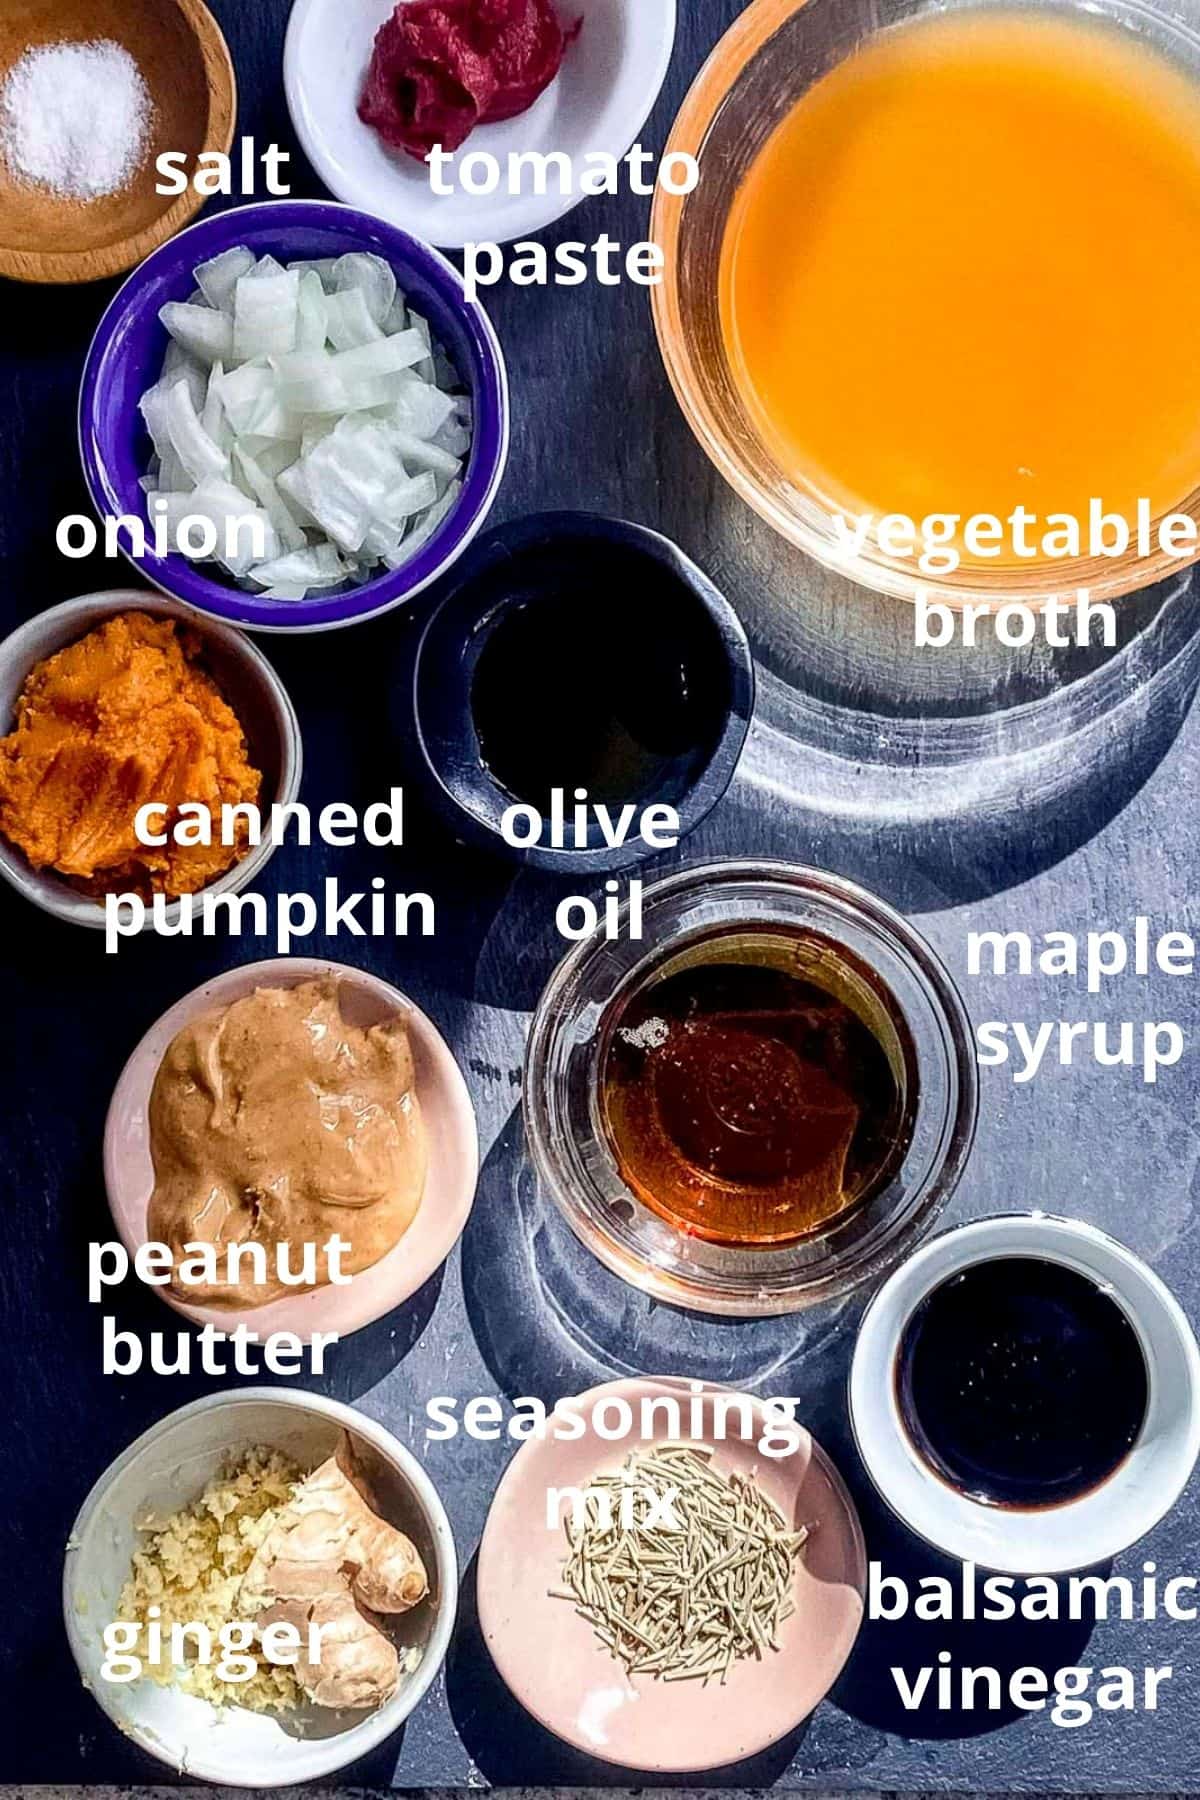 An overhead view of ingredients to make pumpkin sauce displayed in bowls; salt, tomato paste, vegetable broth, diced onion, canned pumpkin, olive oil, peanut butter, maple syrup, balsamic vinegar, seasoning mix, ginger